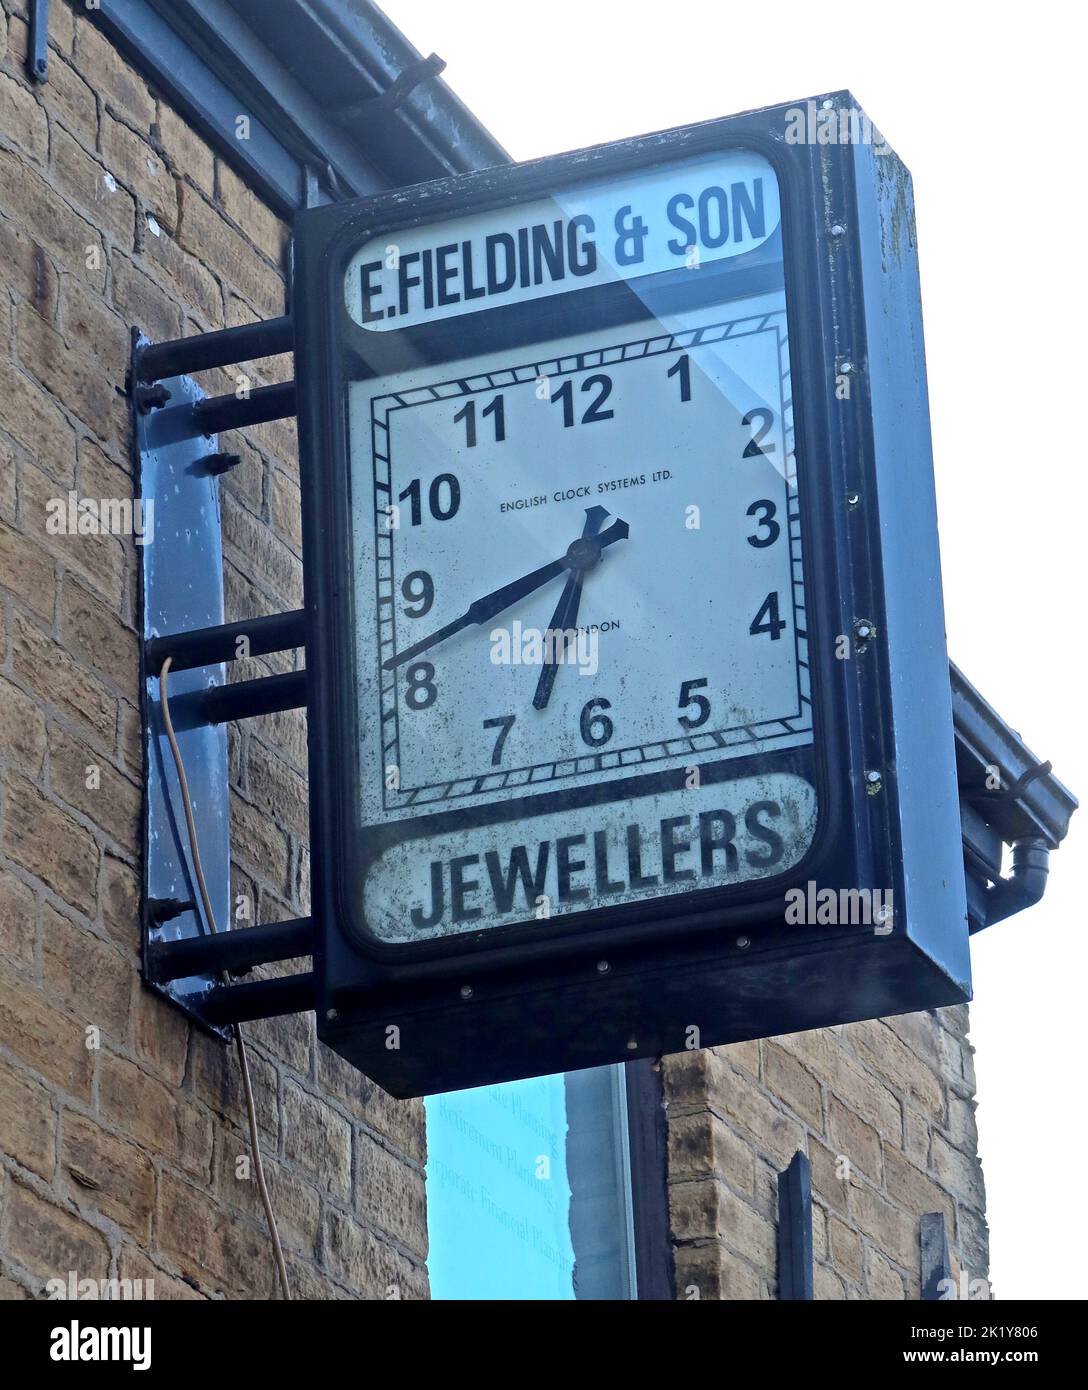 E. Fielding and Son Jewellers clock, Electric Clock Systems, 39 High St W, Glossop, High Peak, Derbyshire, England, UK,  SK13 8AZ Stock Photo